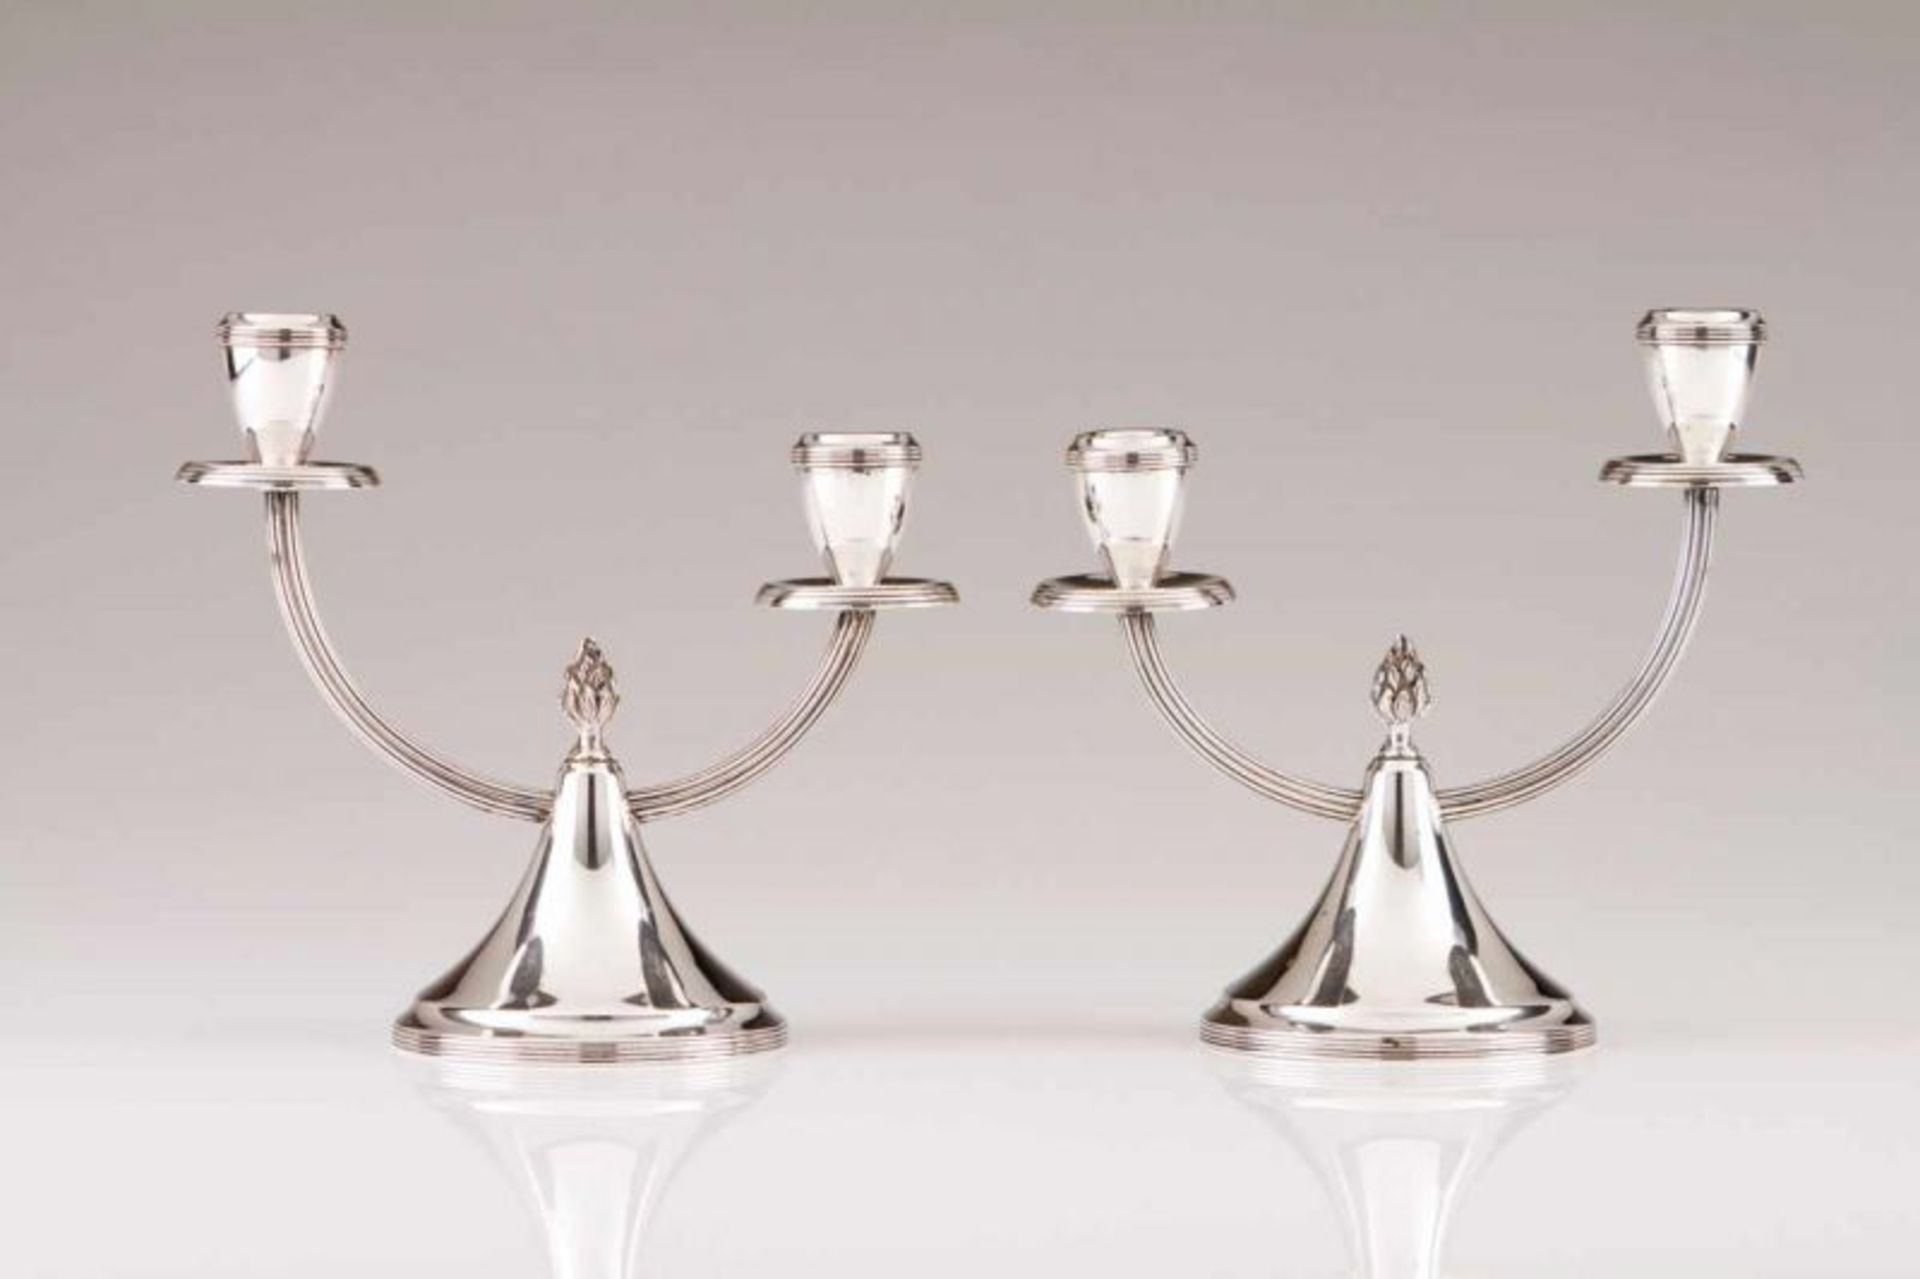 A pair of two-light candelabra Portuguese silver Conical bases with cresset finial, fluted arms